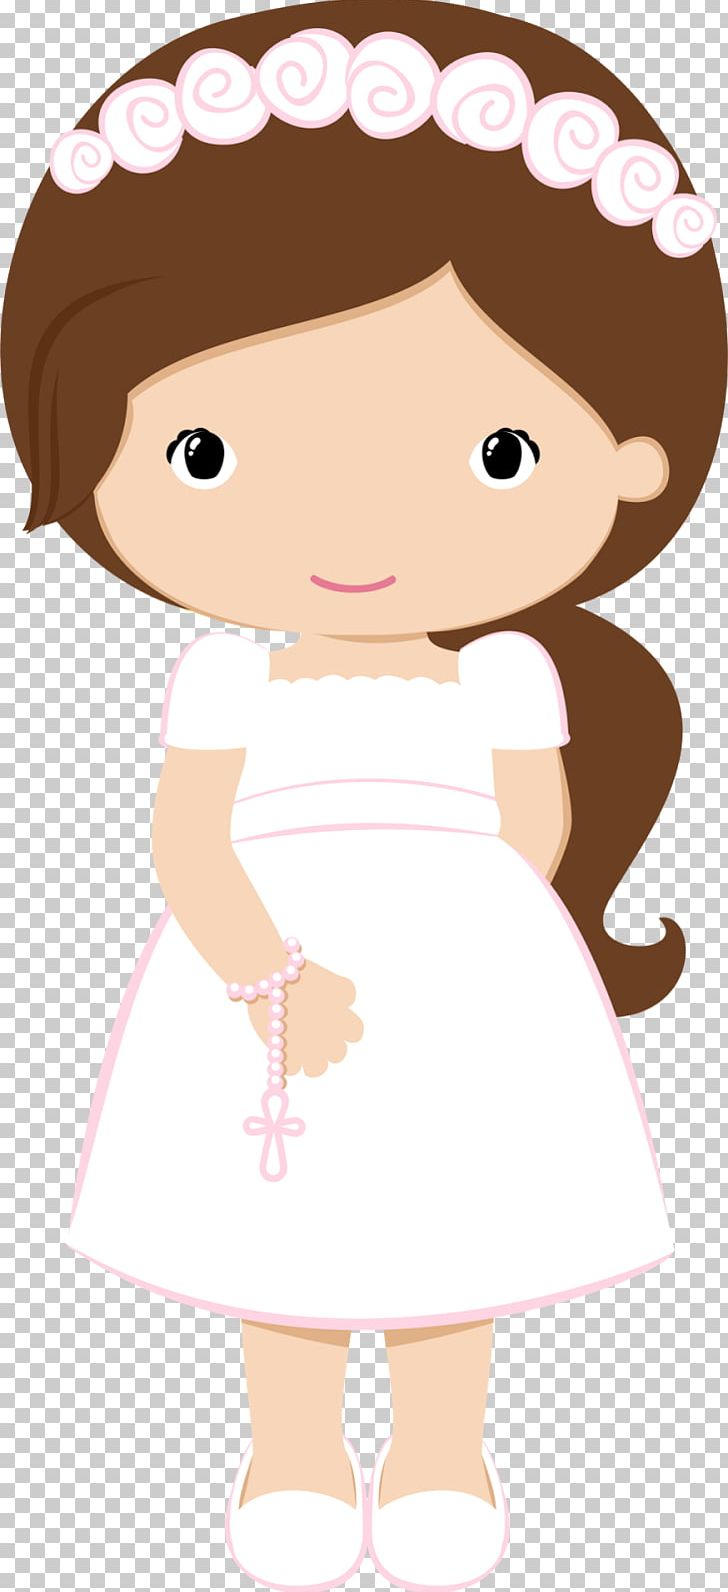 First Communion PNG, Clipart, Art, Baptism, Boy, Brown Hair, Cartoon Free PNG Download